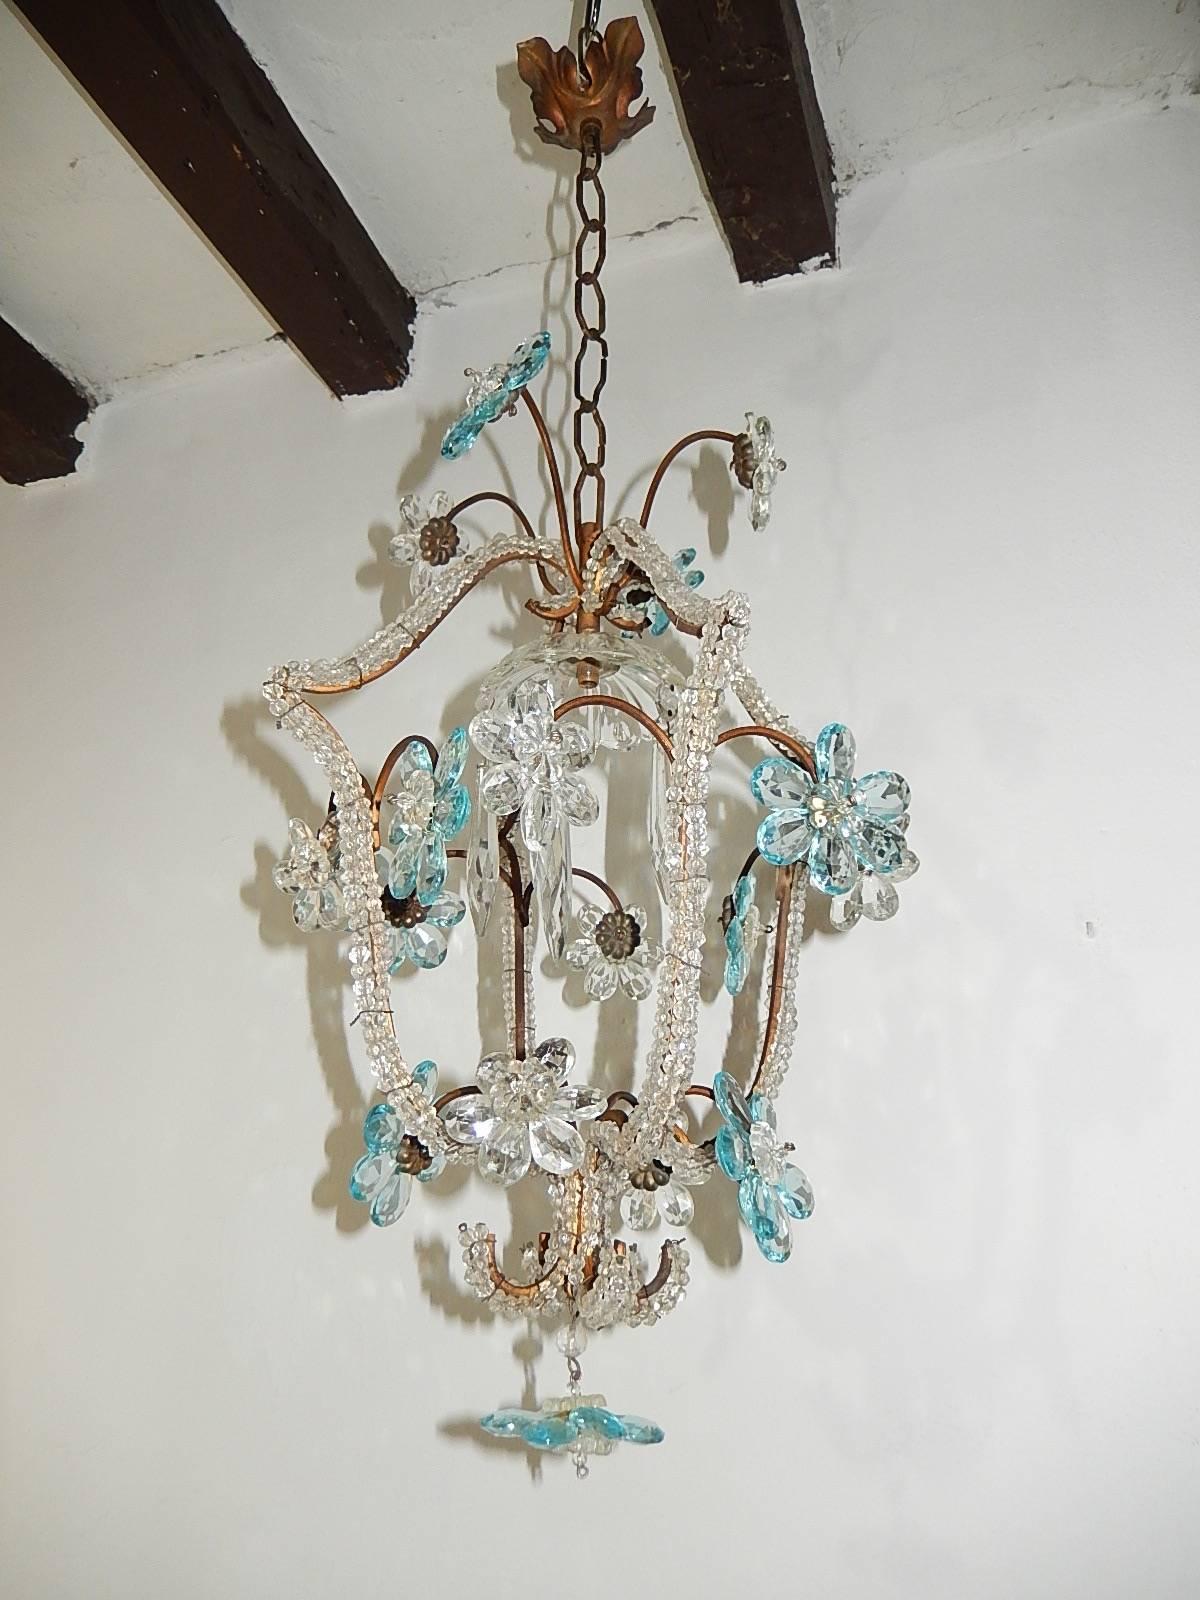 Housing one light, under a crystal bobeche dripping with big crystal spears. Adorning 17 crystal prisms flowers in aqua and clear. Body is triple beaded. Adding another 20 inches of original chain and canopy. Re-wired and ready to hang. Free